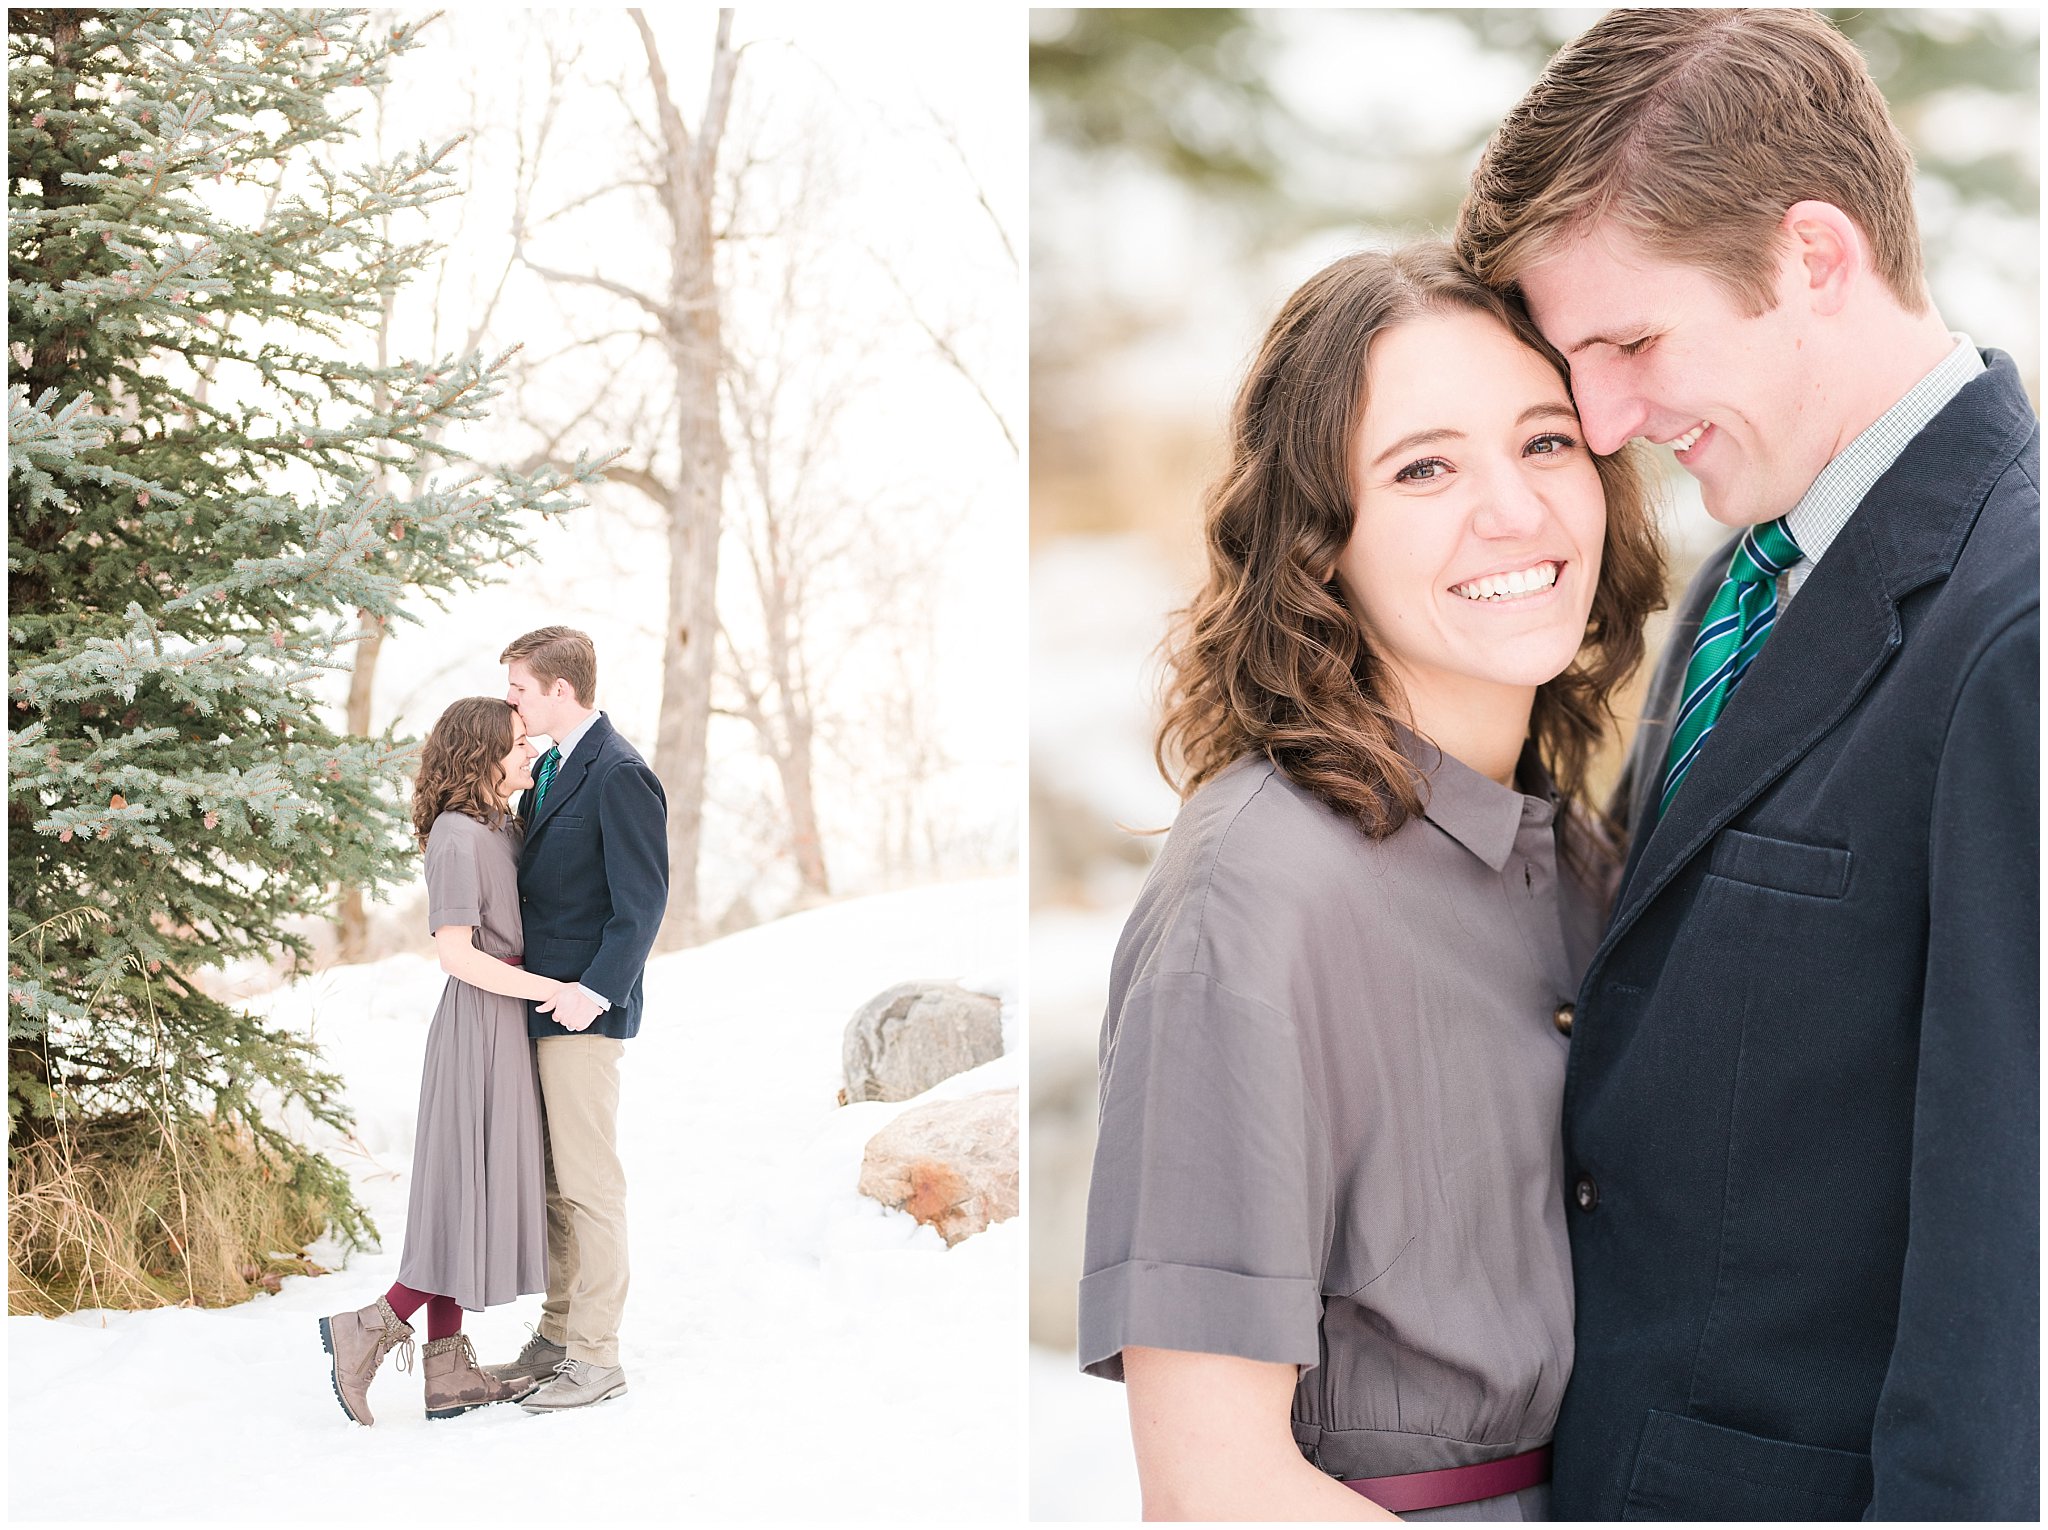 Snowy engagement session with pine trees and couple dressed up in grey dress and navy sport coat in the mountains | Snowbasin Winter Engagement Session